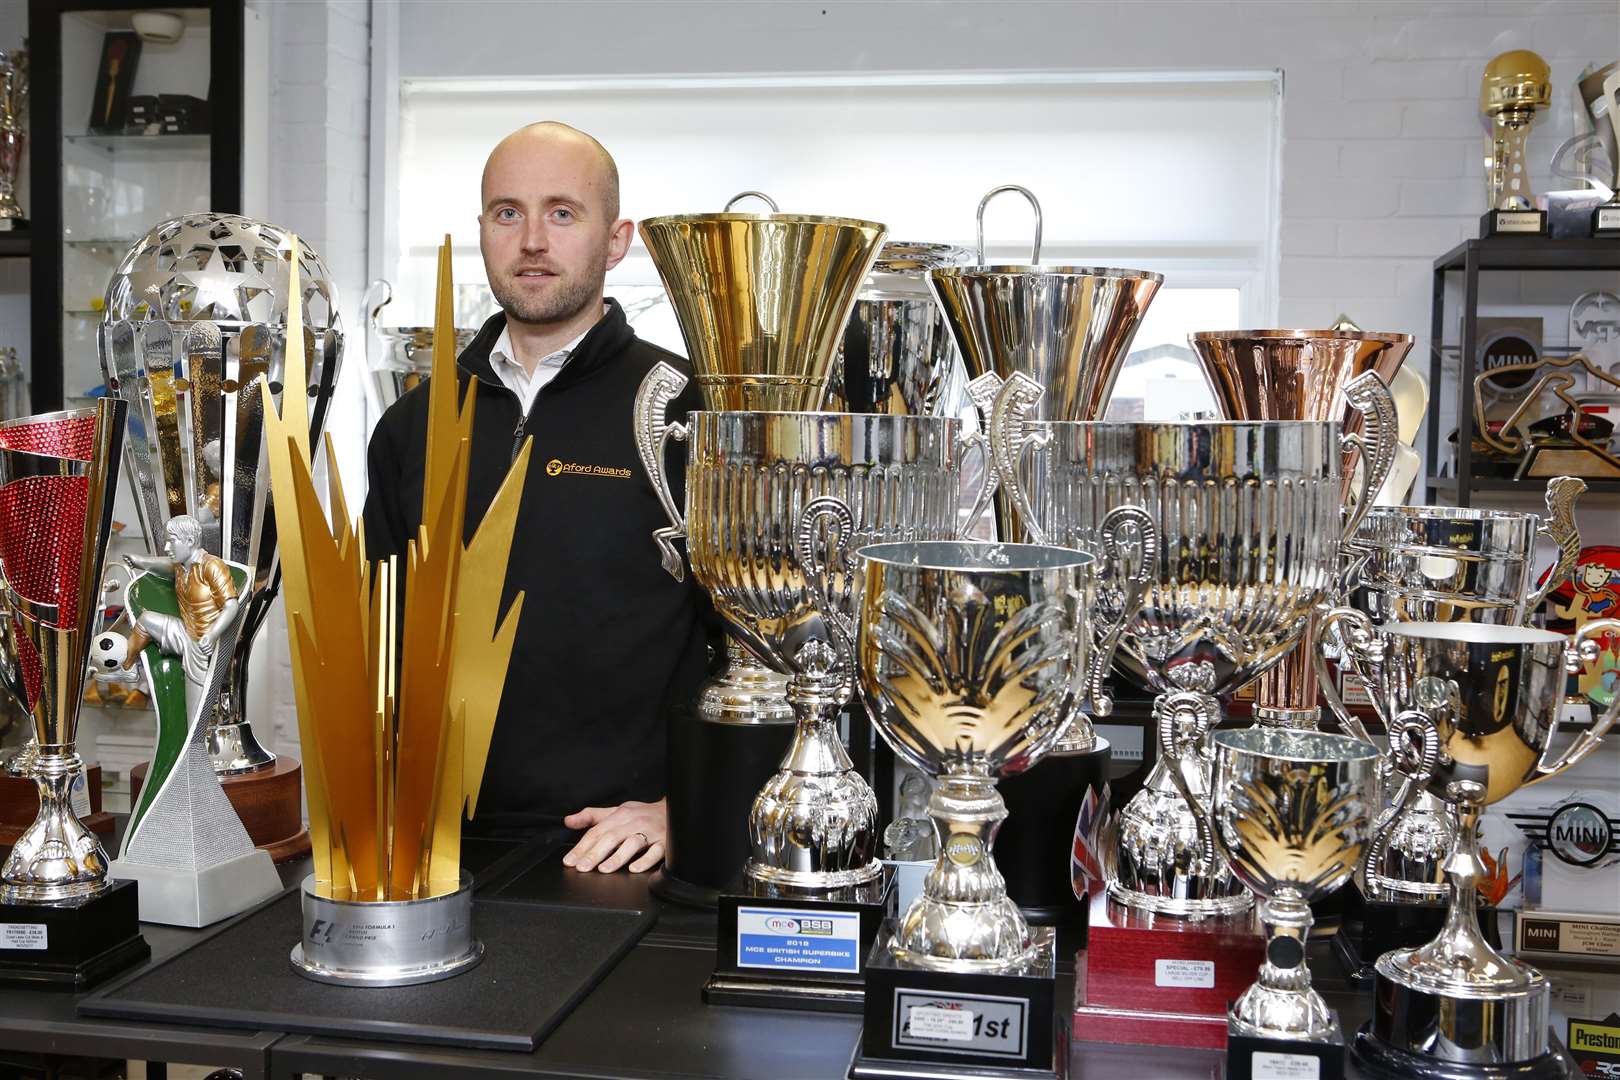 British Formula 1 Grand Prix trophies created by Bearsted firm Aford Awards